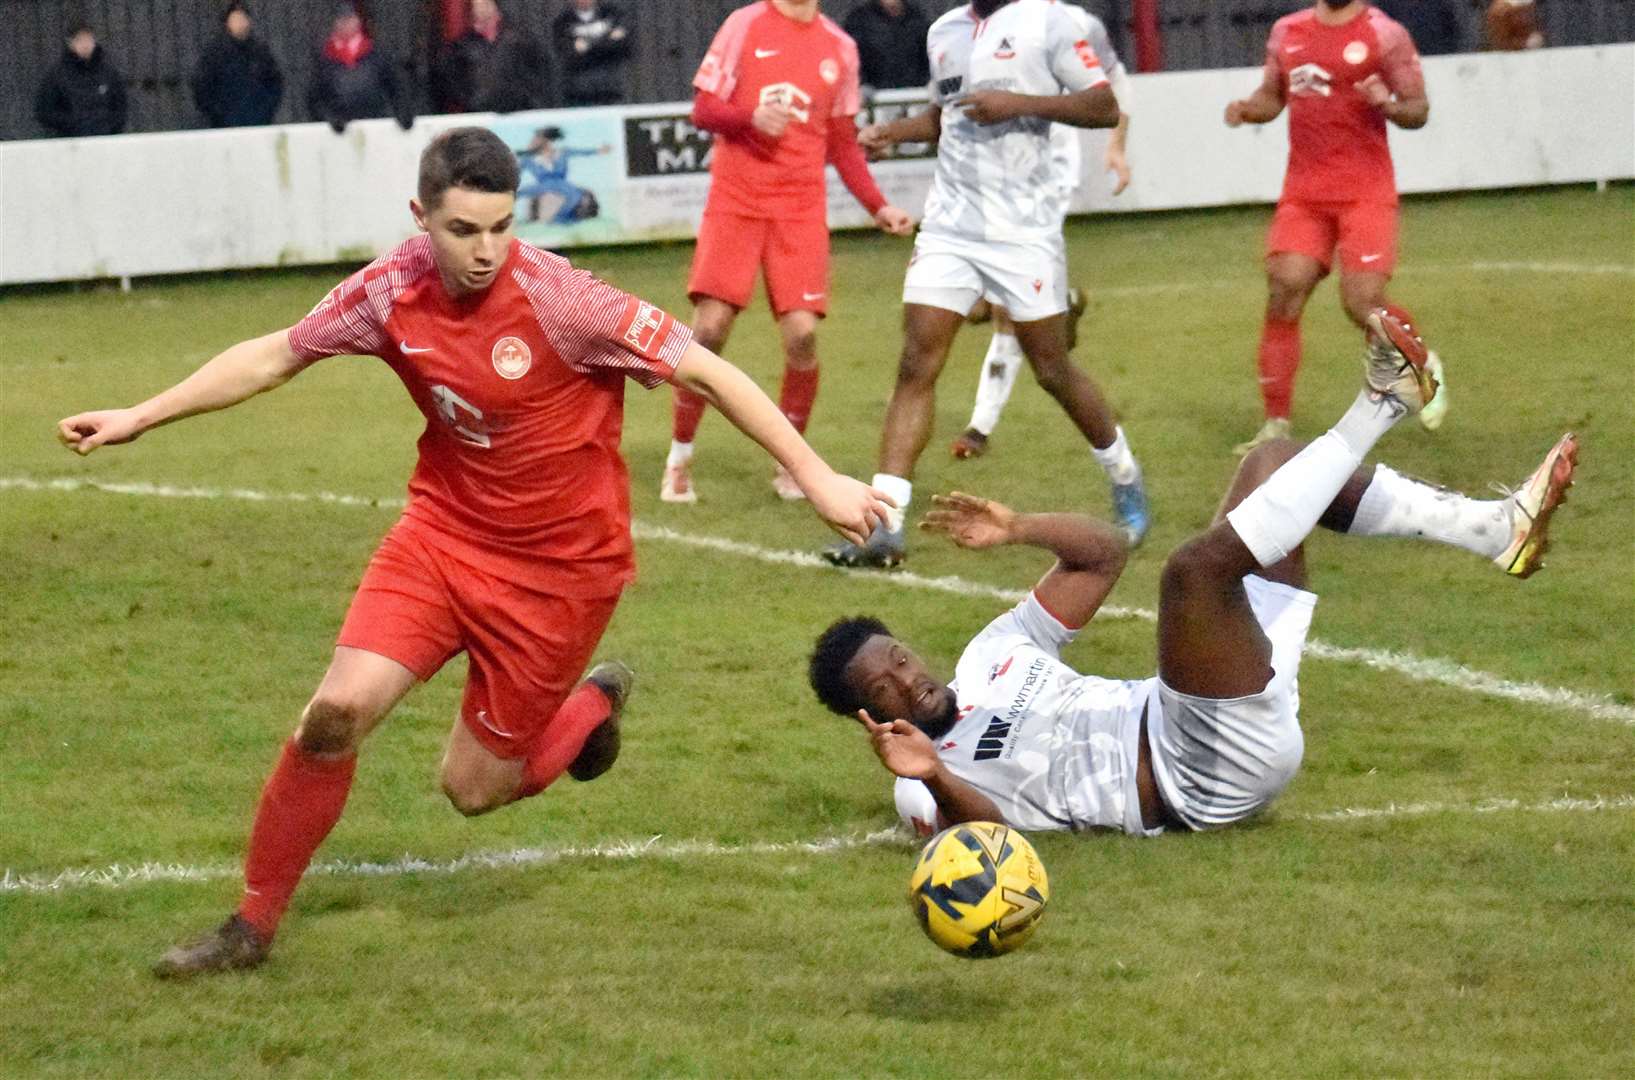 Hythe striker Jake Embery tries to get to the loose ball against Ramsgate Picture: Randolph File